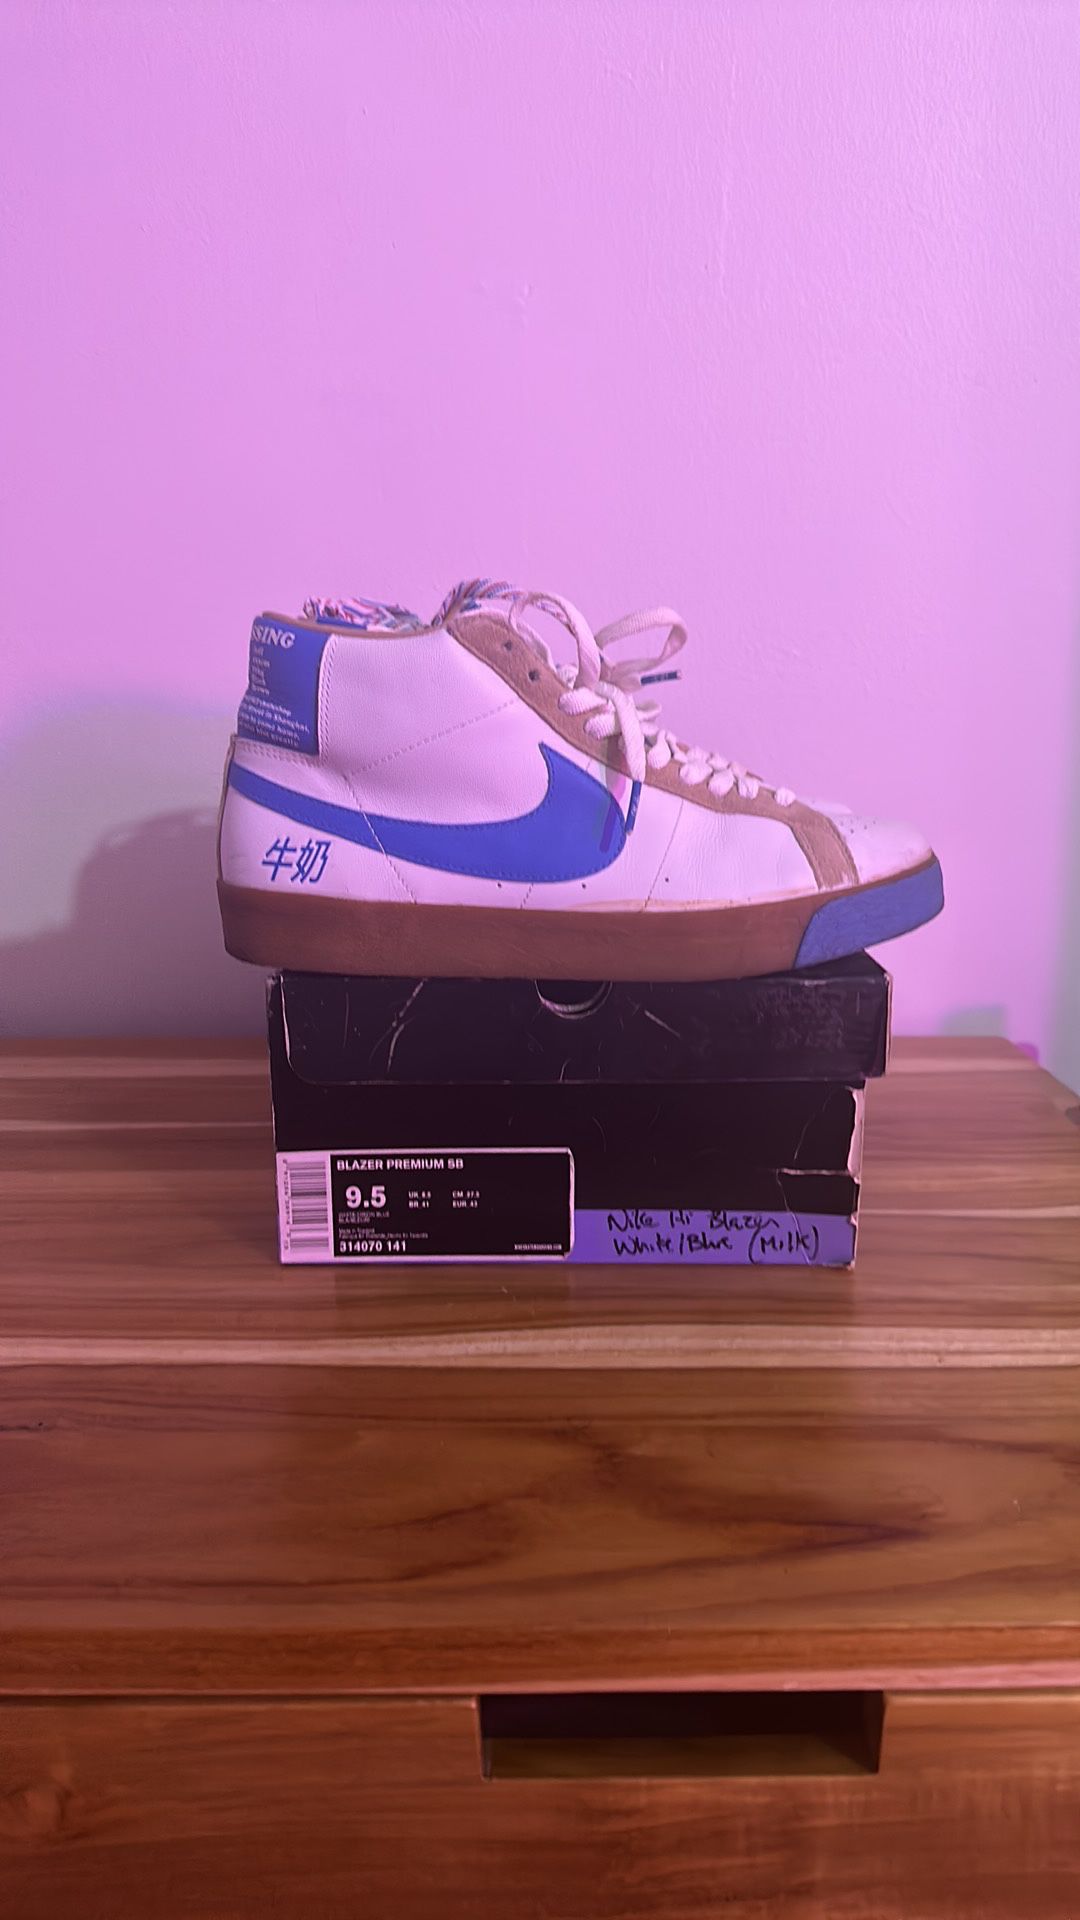 Nike Sb - Milk Crates for Sale in New York, - OfferUp